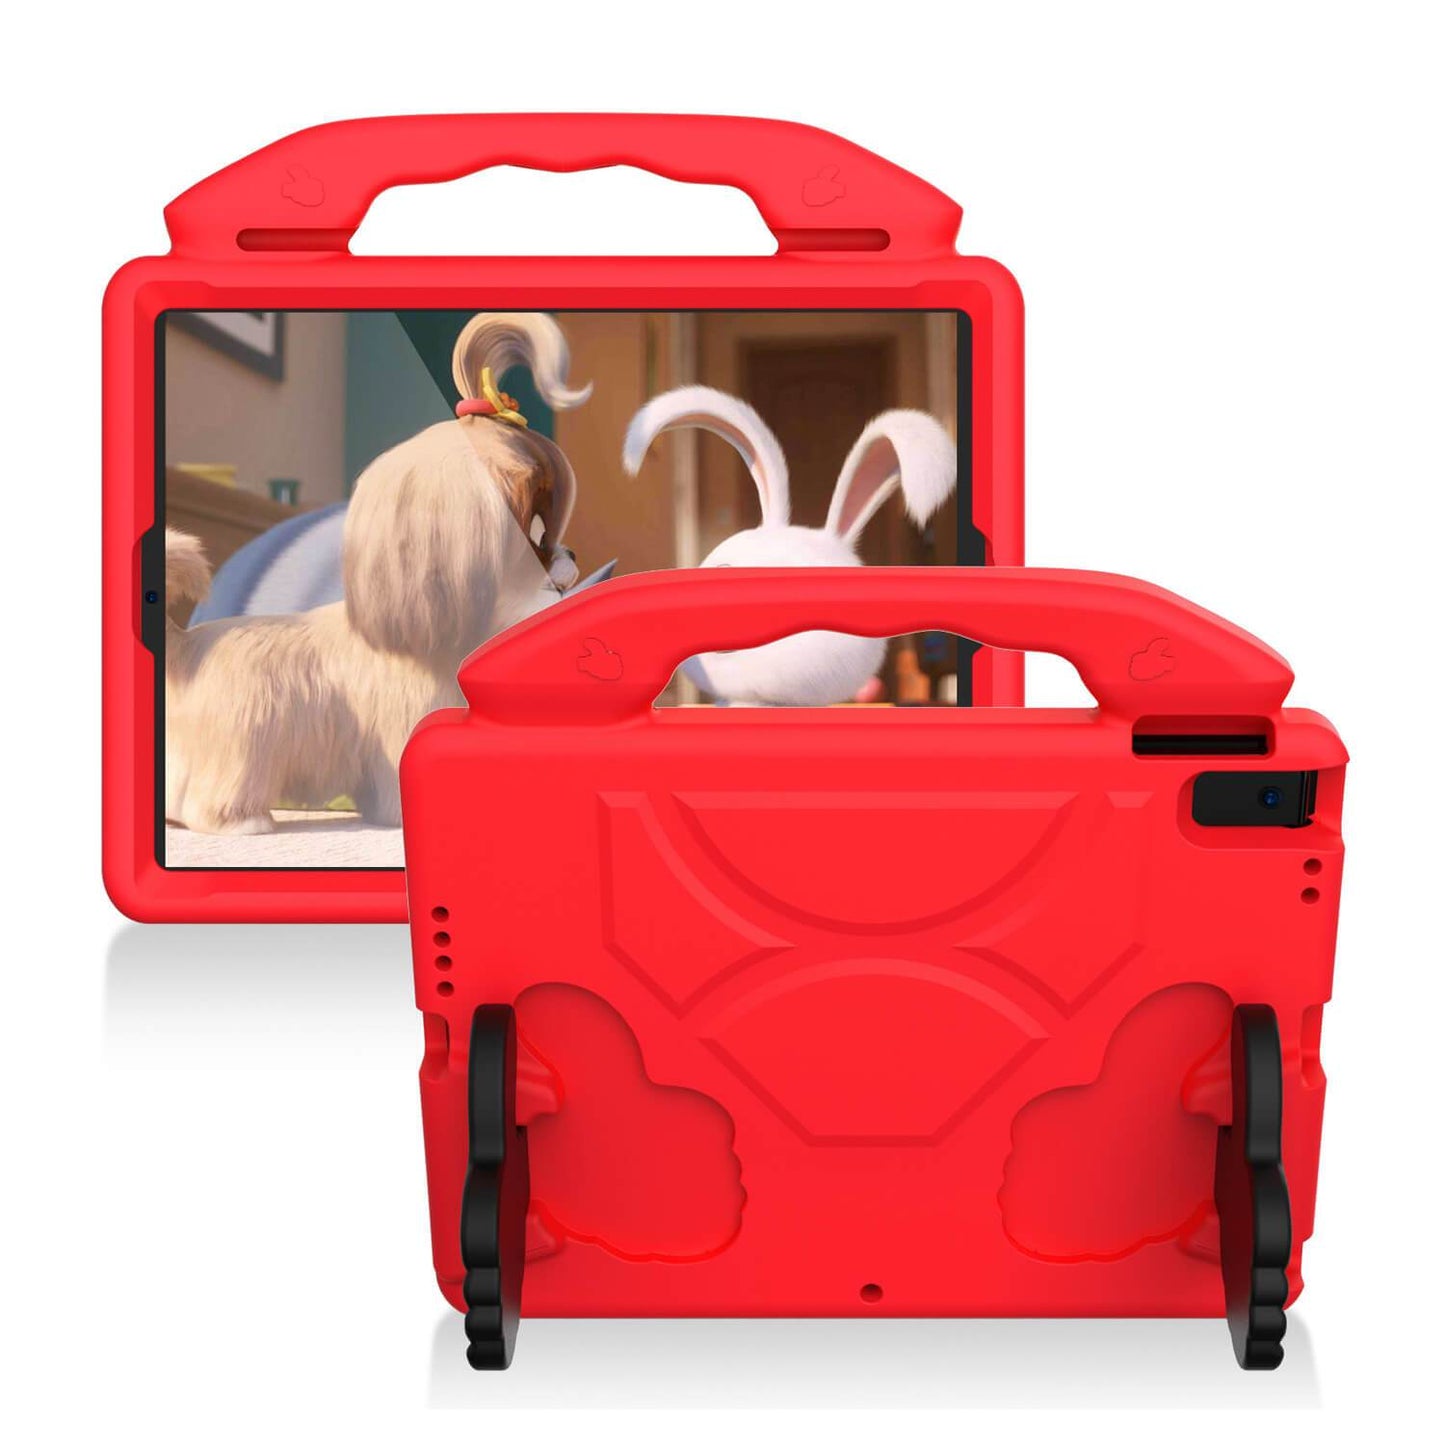 Tough On iPad Air 3 / Pro 10.5" Case EVA Kids Protection Red